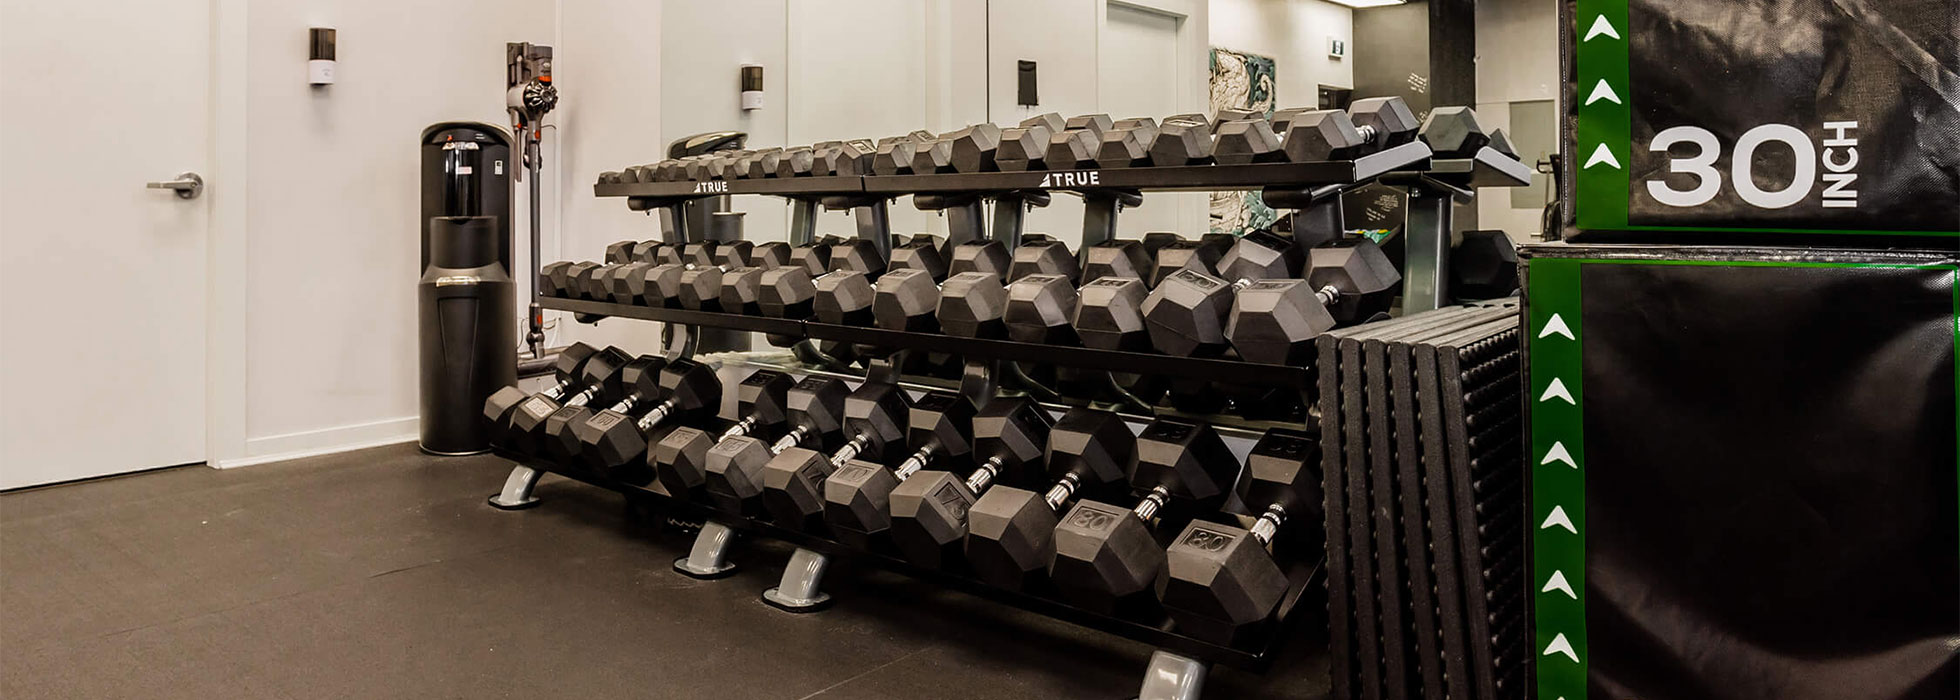 A Gym Near SFU That Can Help With Weight Loss And Dieting